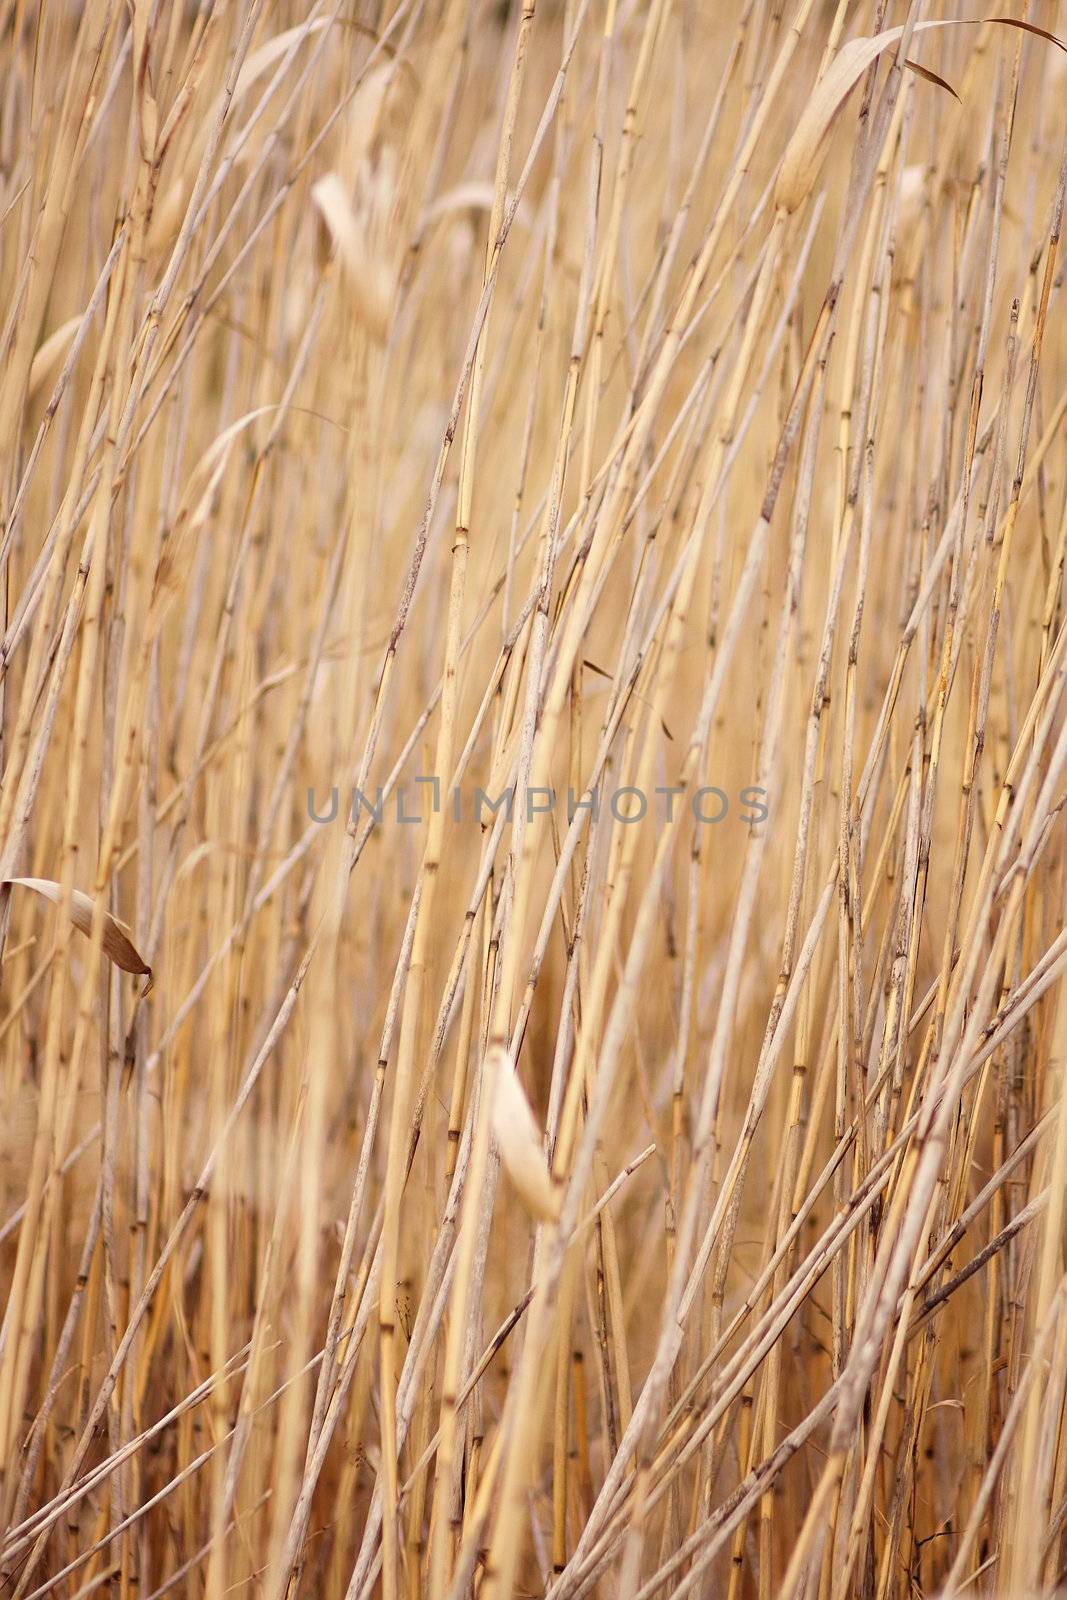 Abstract background.
Structure - the Dry reed, a cane